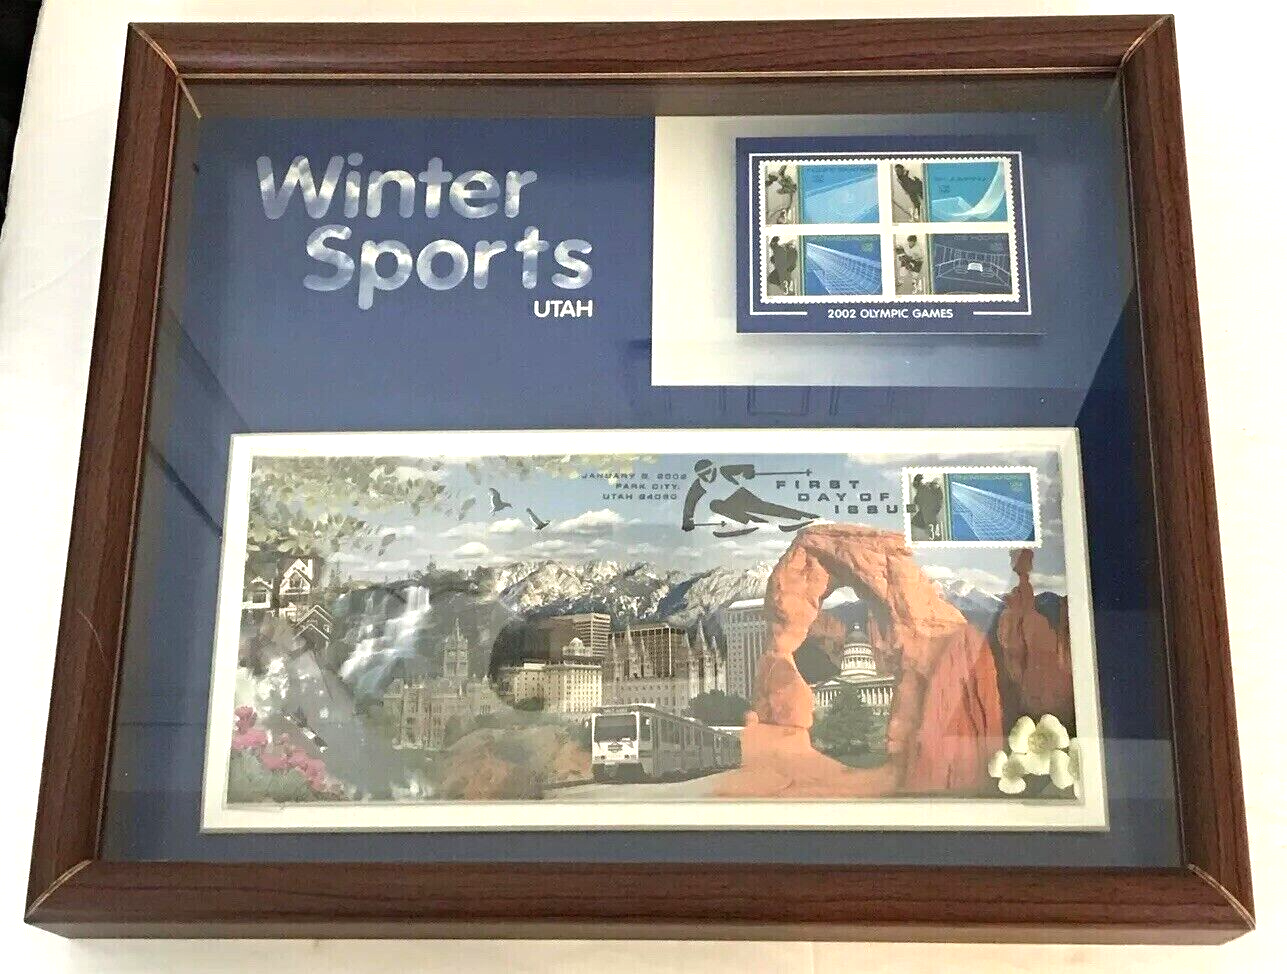 Primary image for USPS Stamps 2002 WINTER SPORTS SALT LAKE CACHET UTAH OLYMPICS Shadow Box Frame